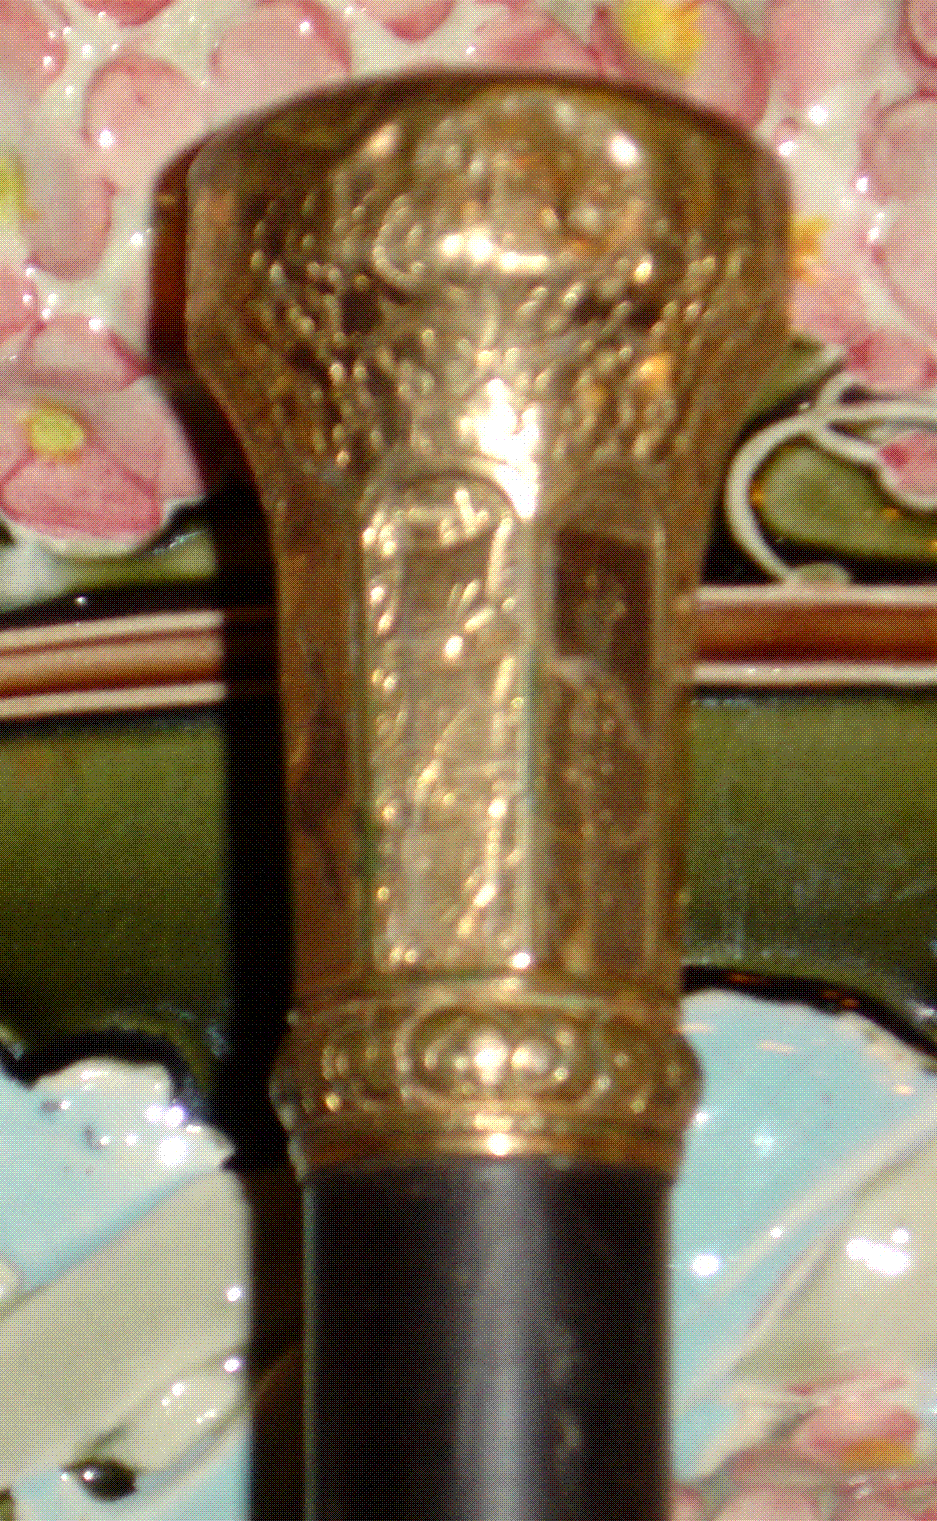 Gold Headed Cane